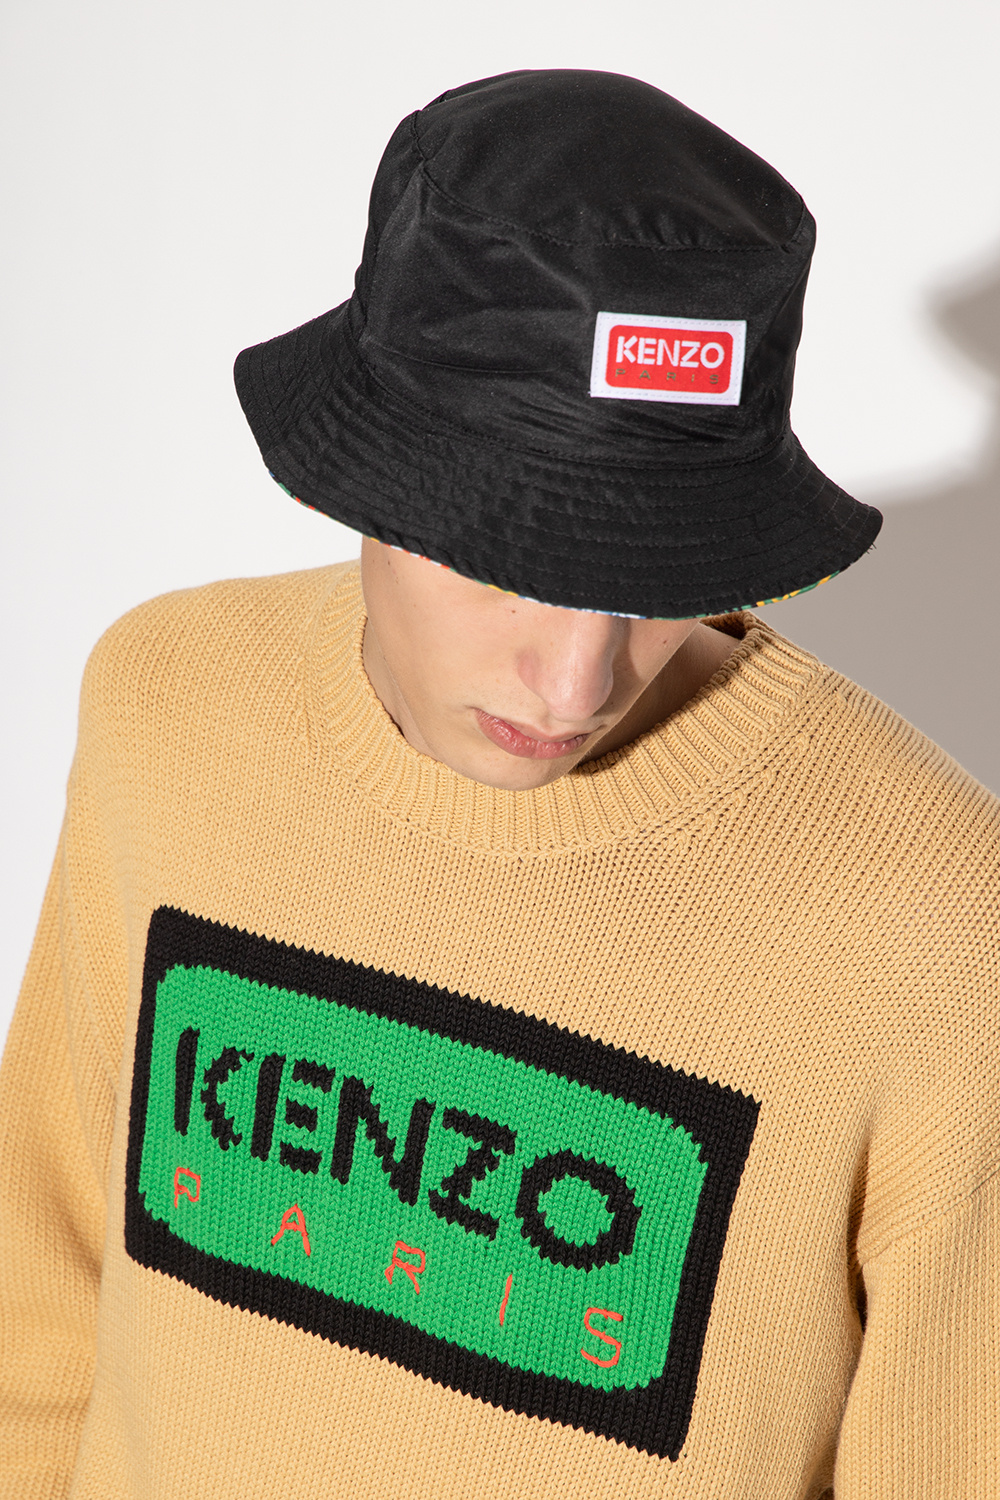 Kenzo Girl Power graphics make this fun pom hat Quaxar an essential winter hat Quaxar for your favorite ski bunny